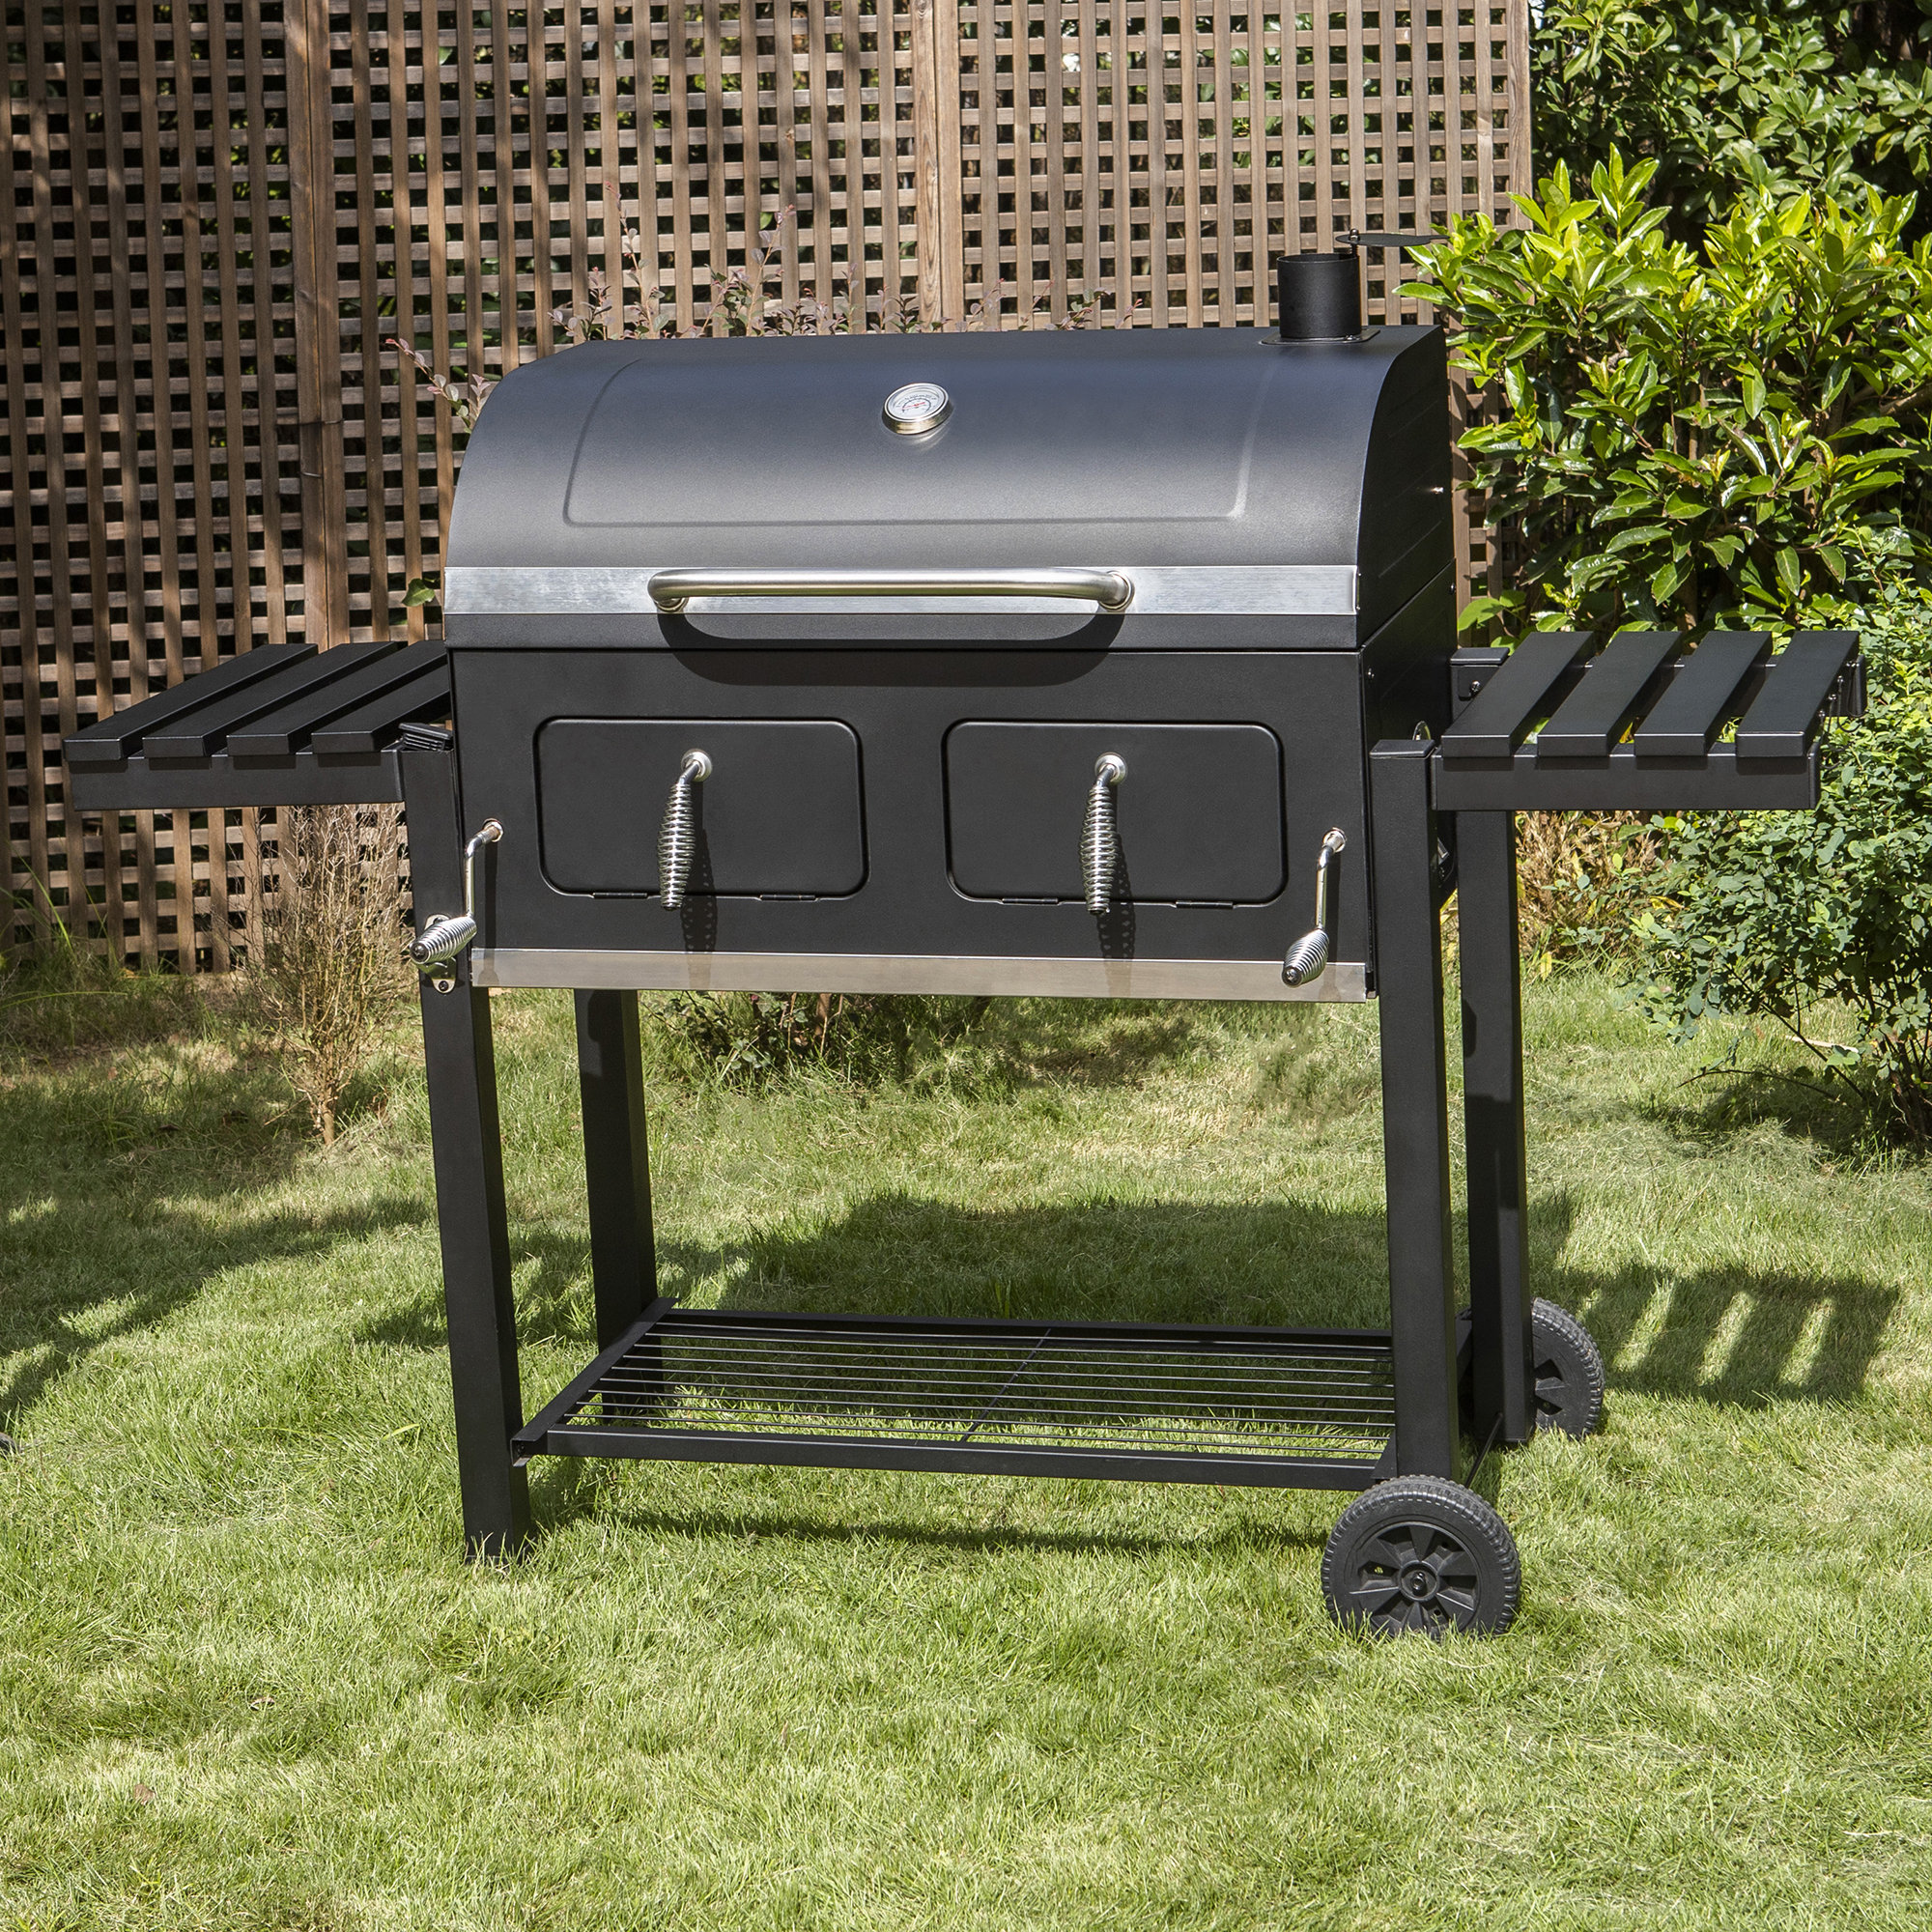 Packable Grill - 4.8 x 4.8